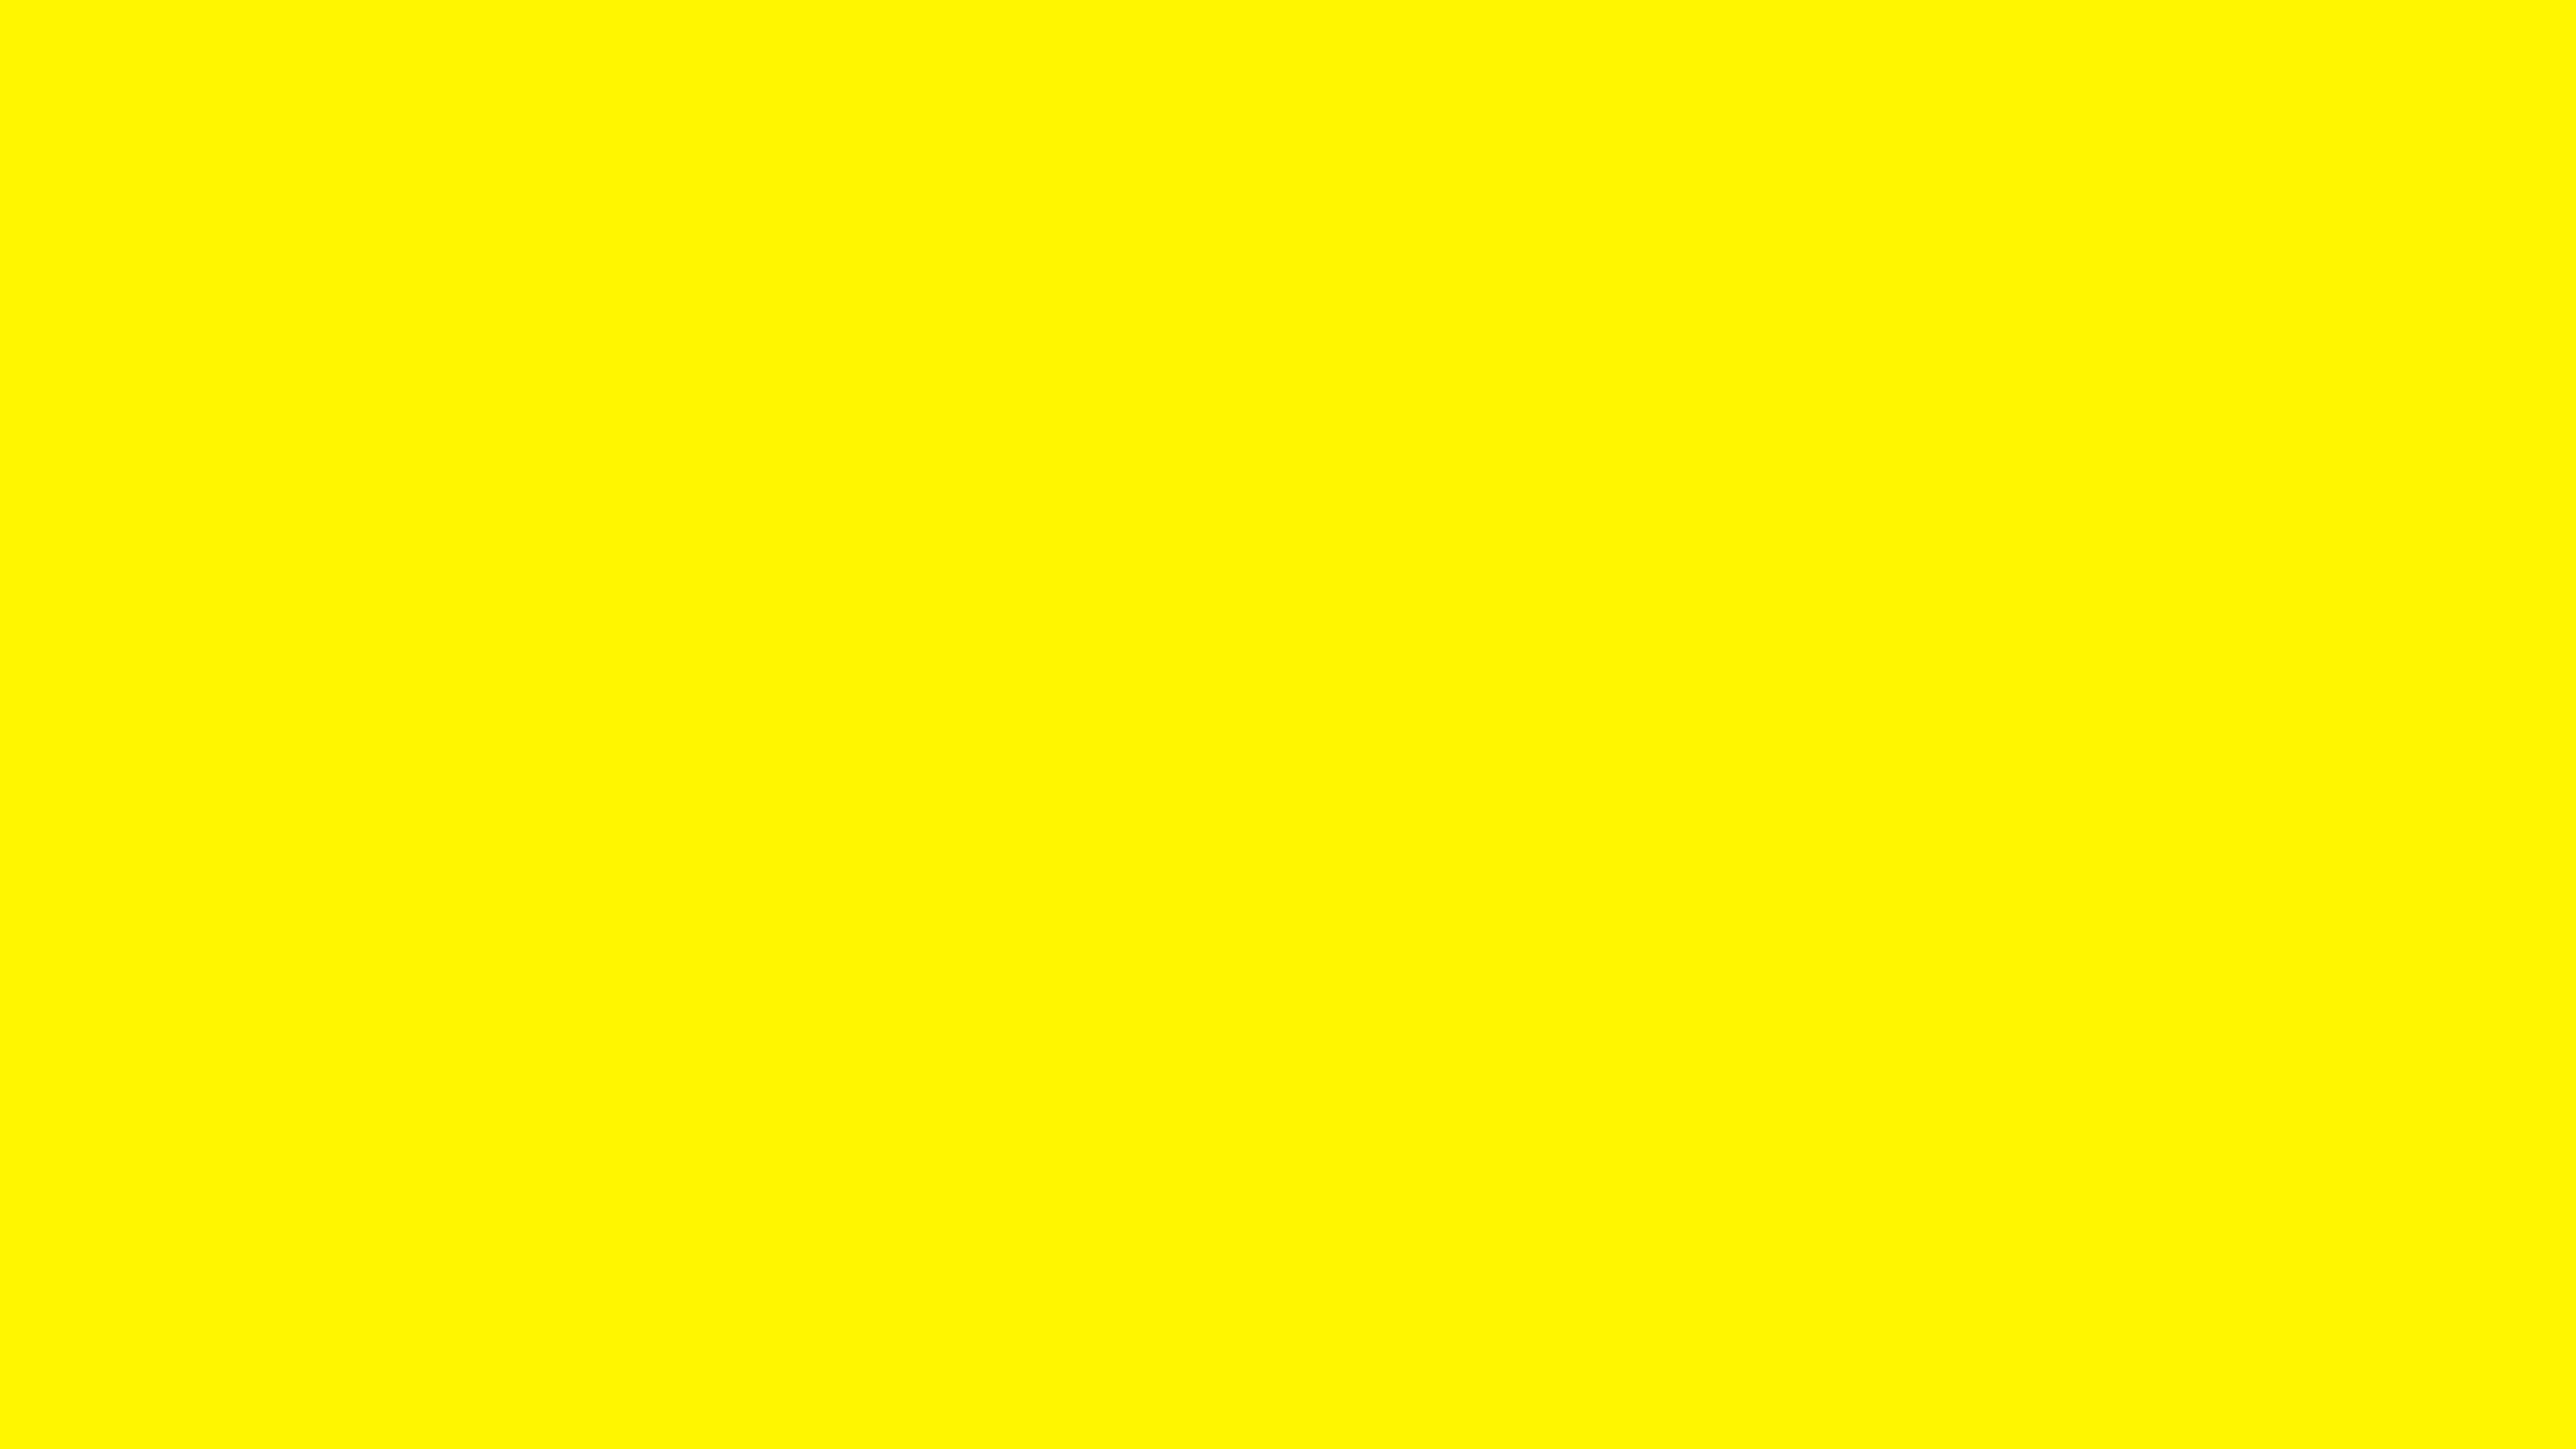 7680x4320 Cadmium Yellow Solid Color Background